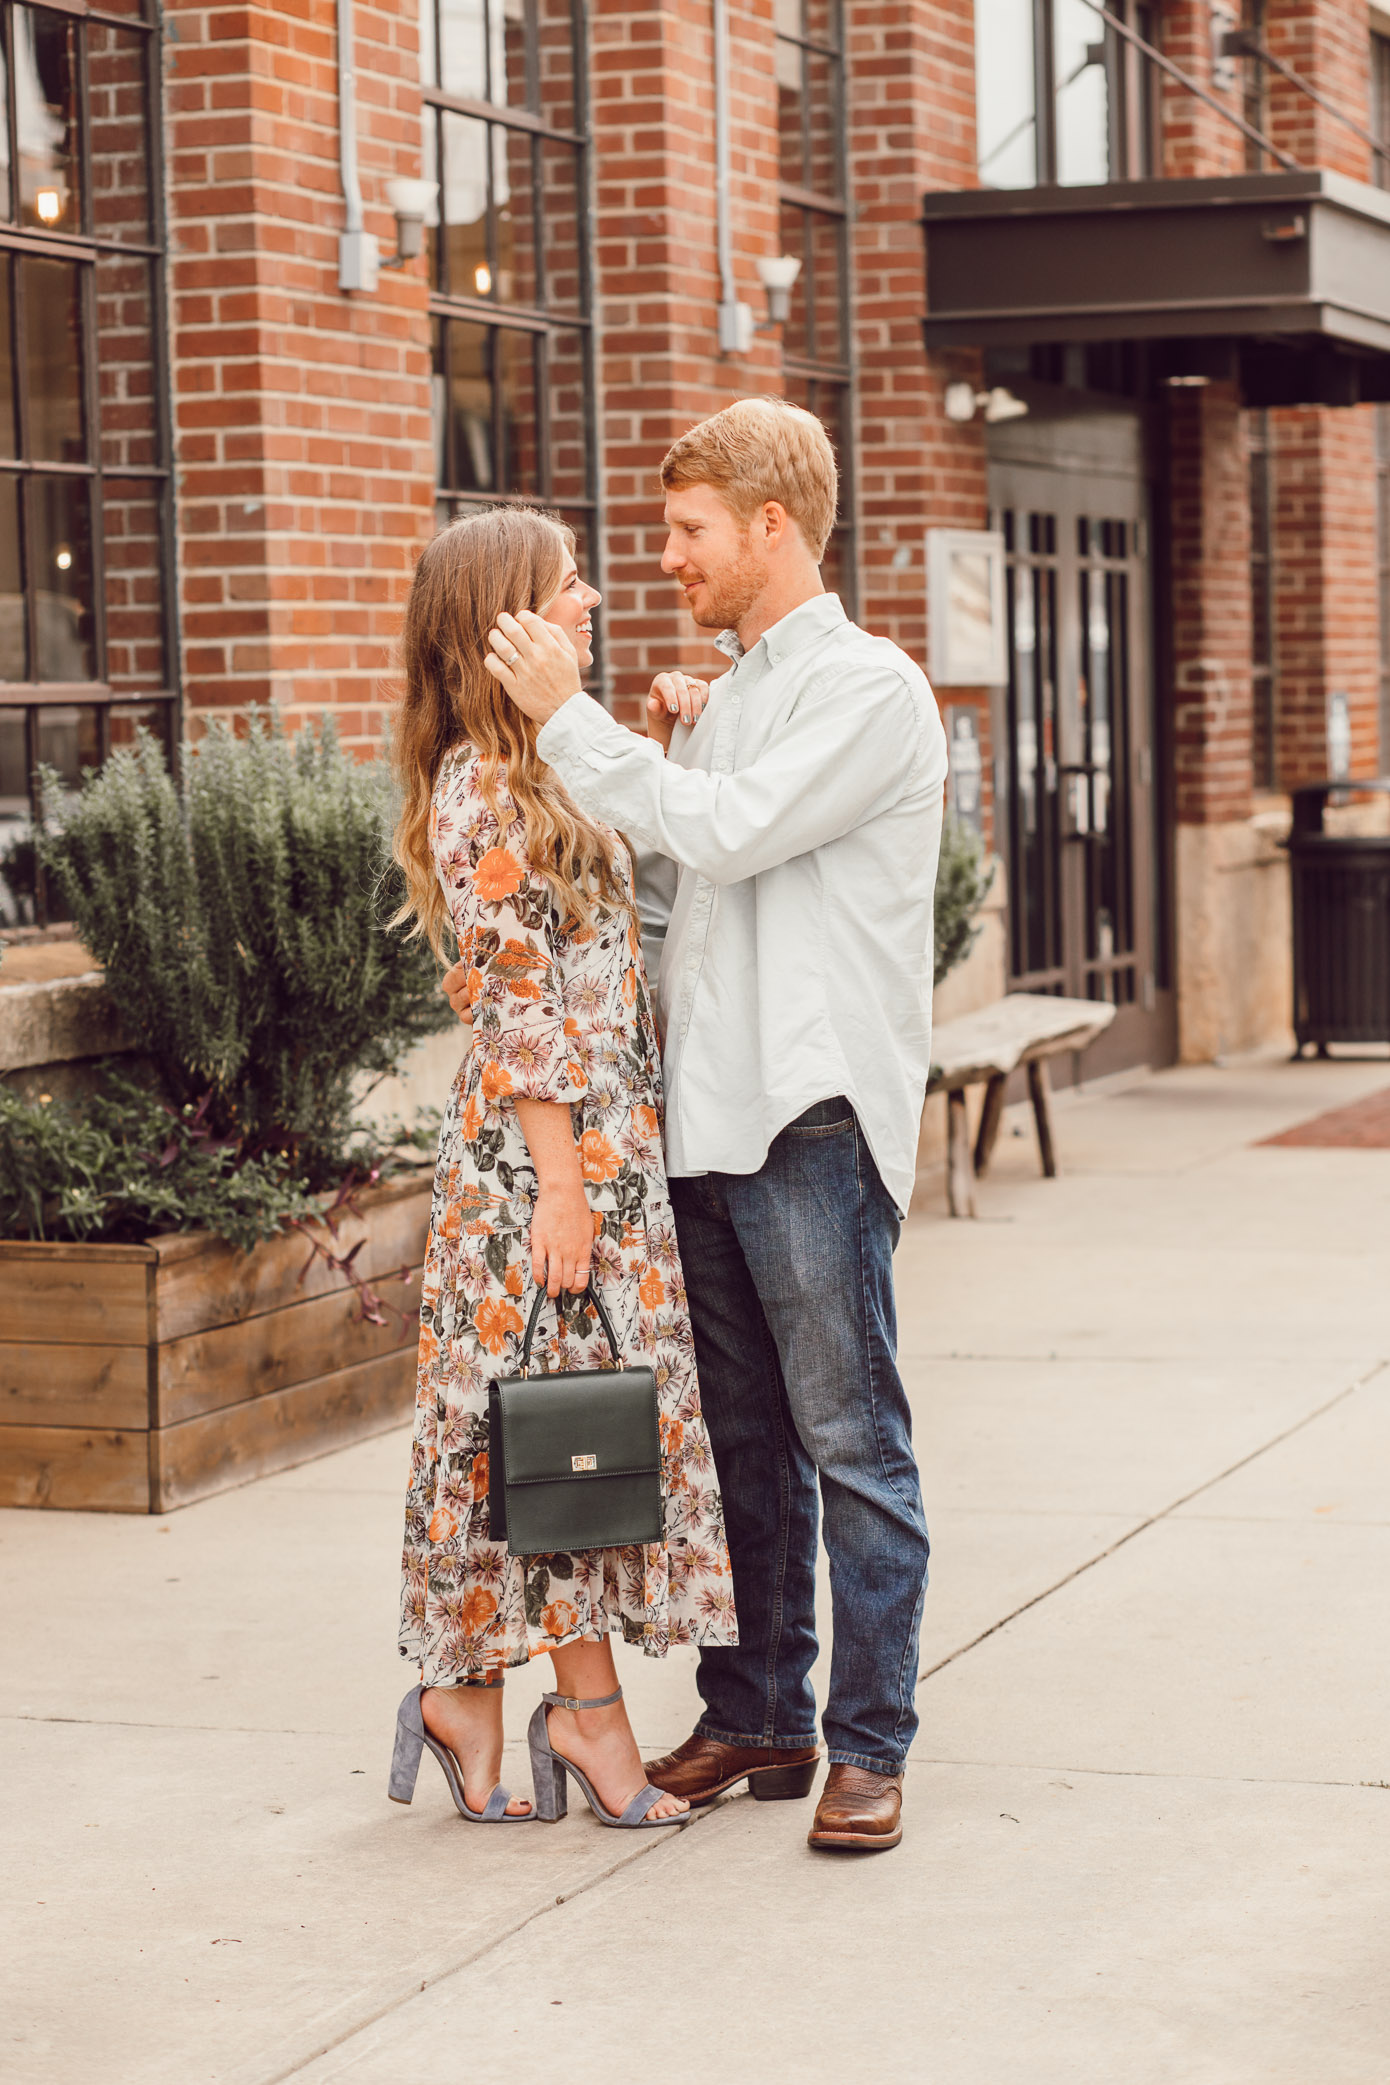 Fall Floral Midi Dress for Date Night | Date Night Beauty Tips featured on Louella Reese Blog